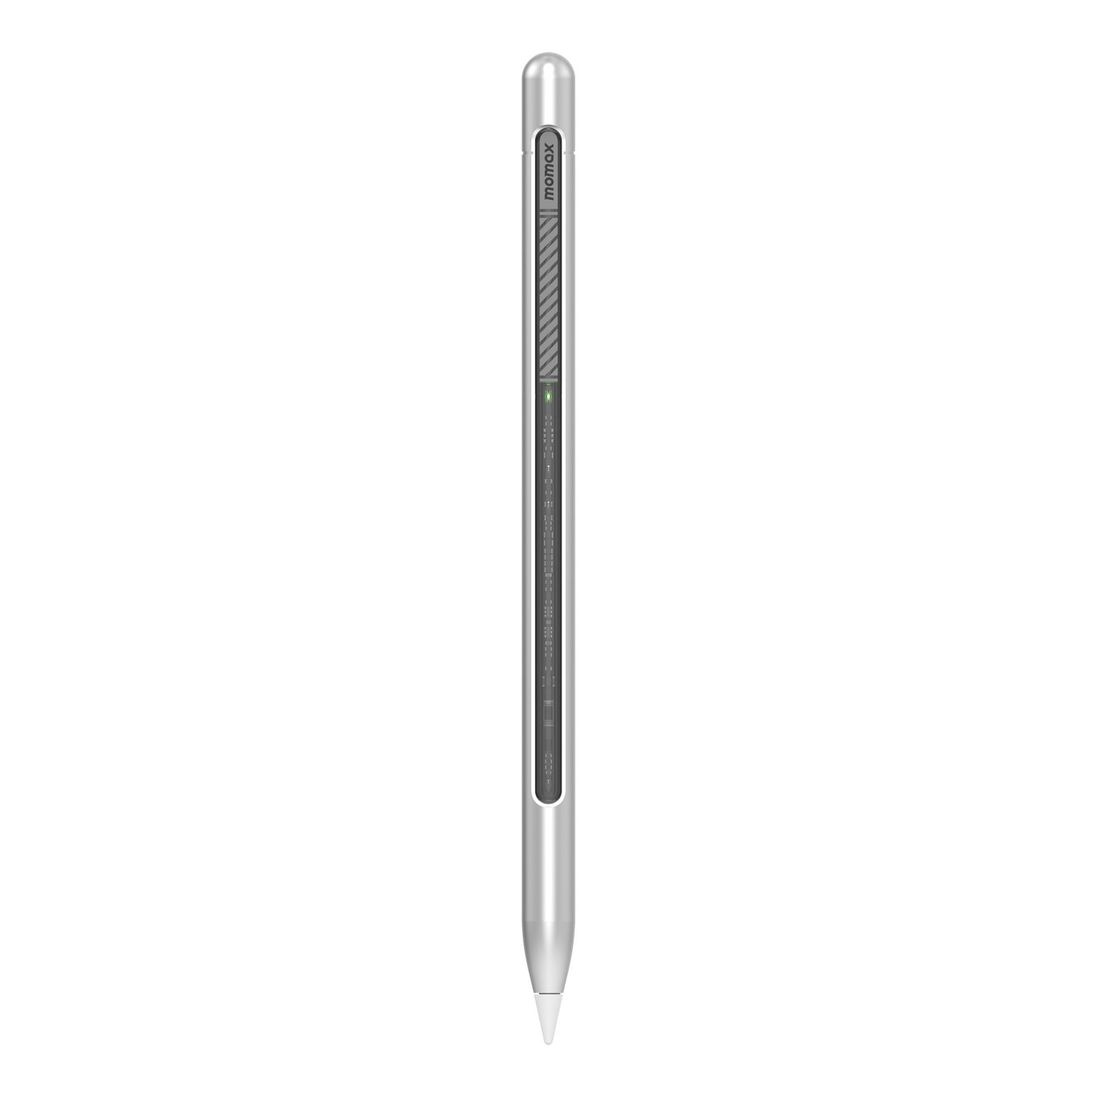 Momax Mag.Link Lite Magnetic Charging Active Stylus Pen - Silver